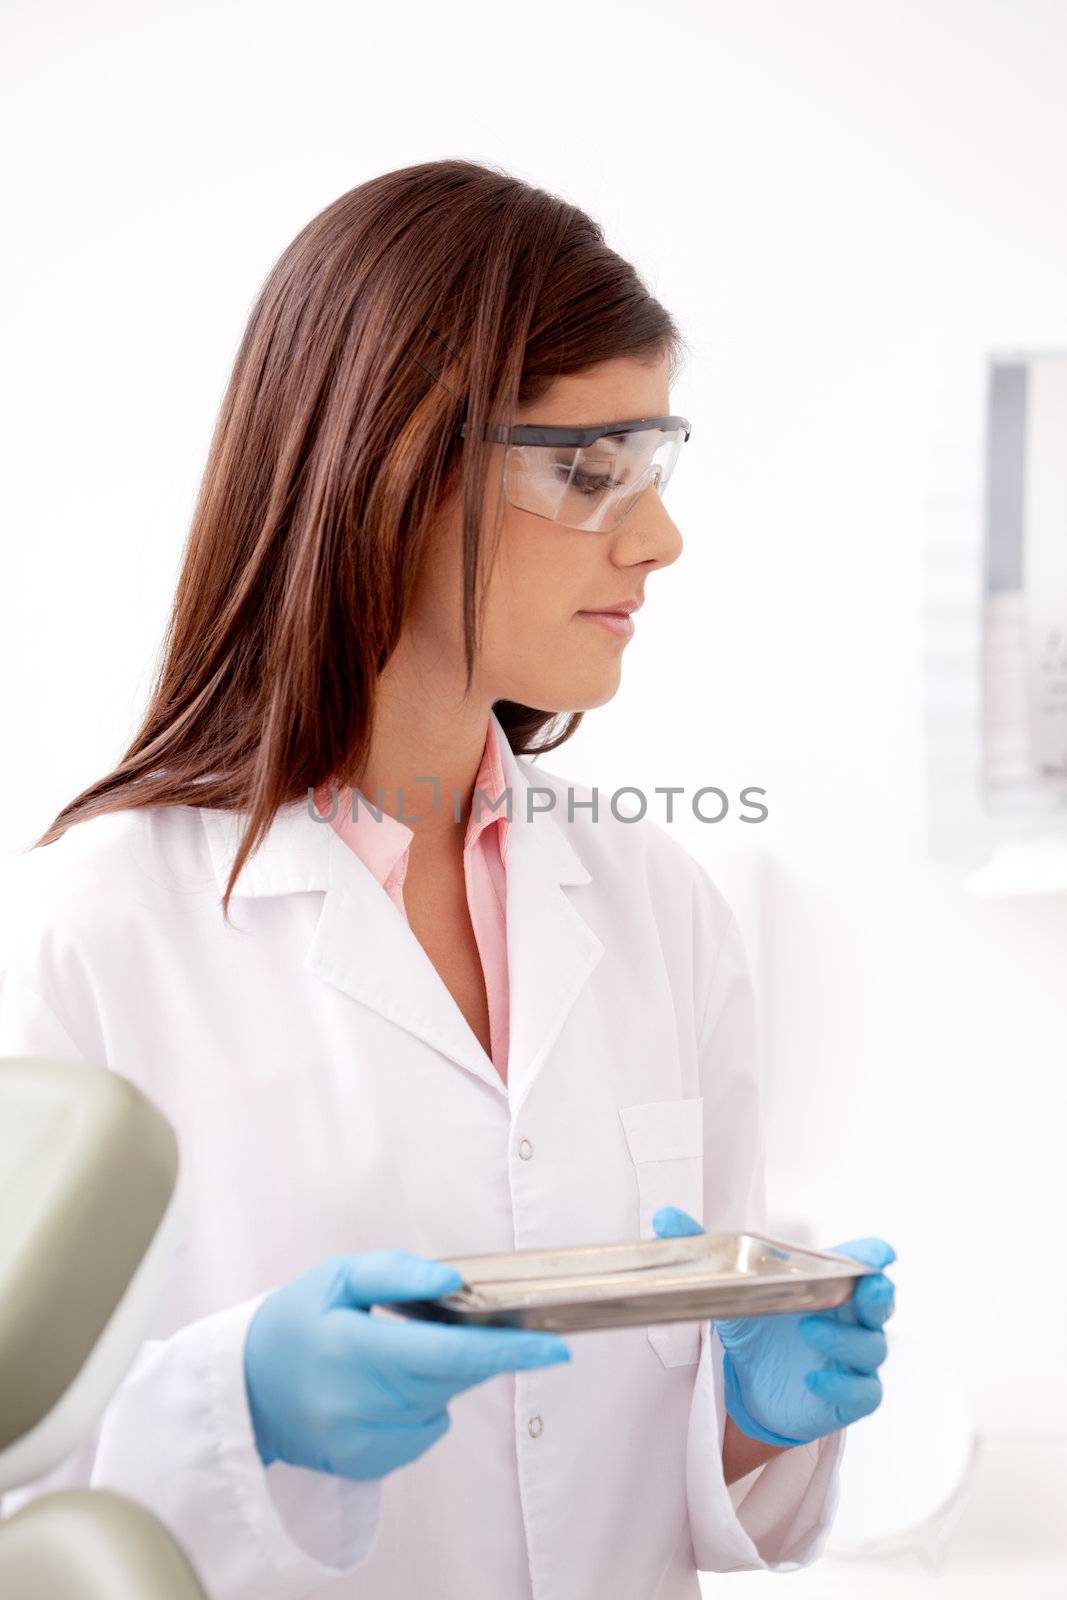 Dentist holding stainless steel tray of sterile tools